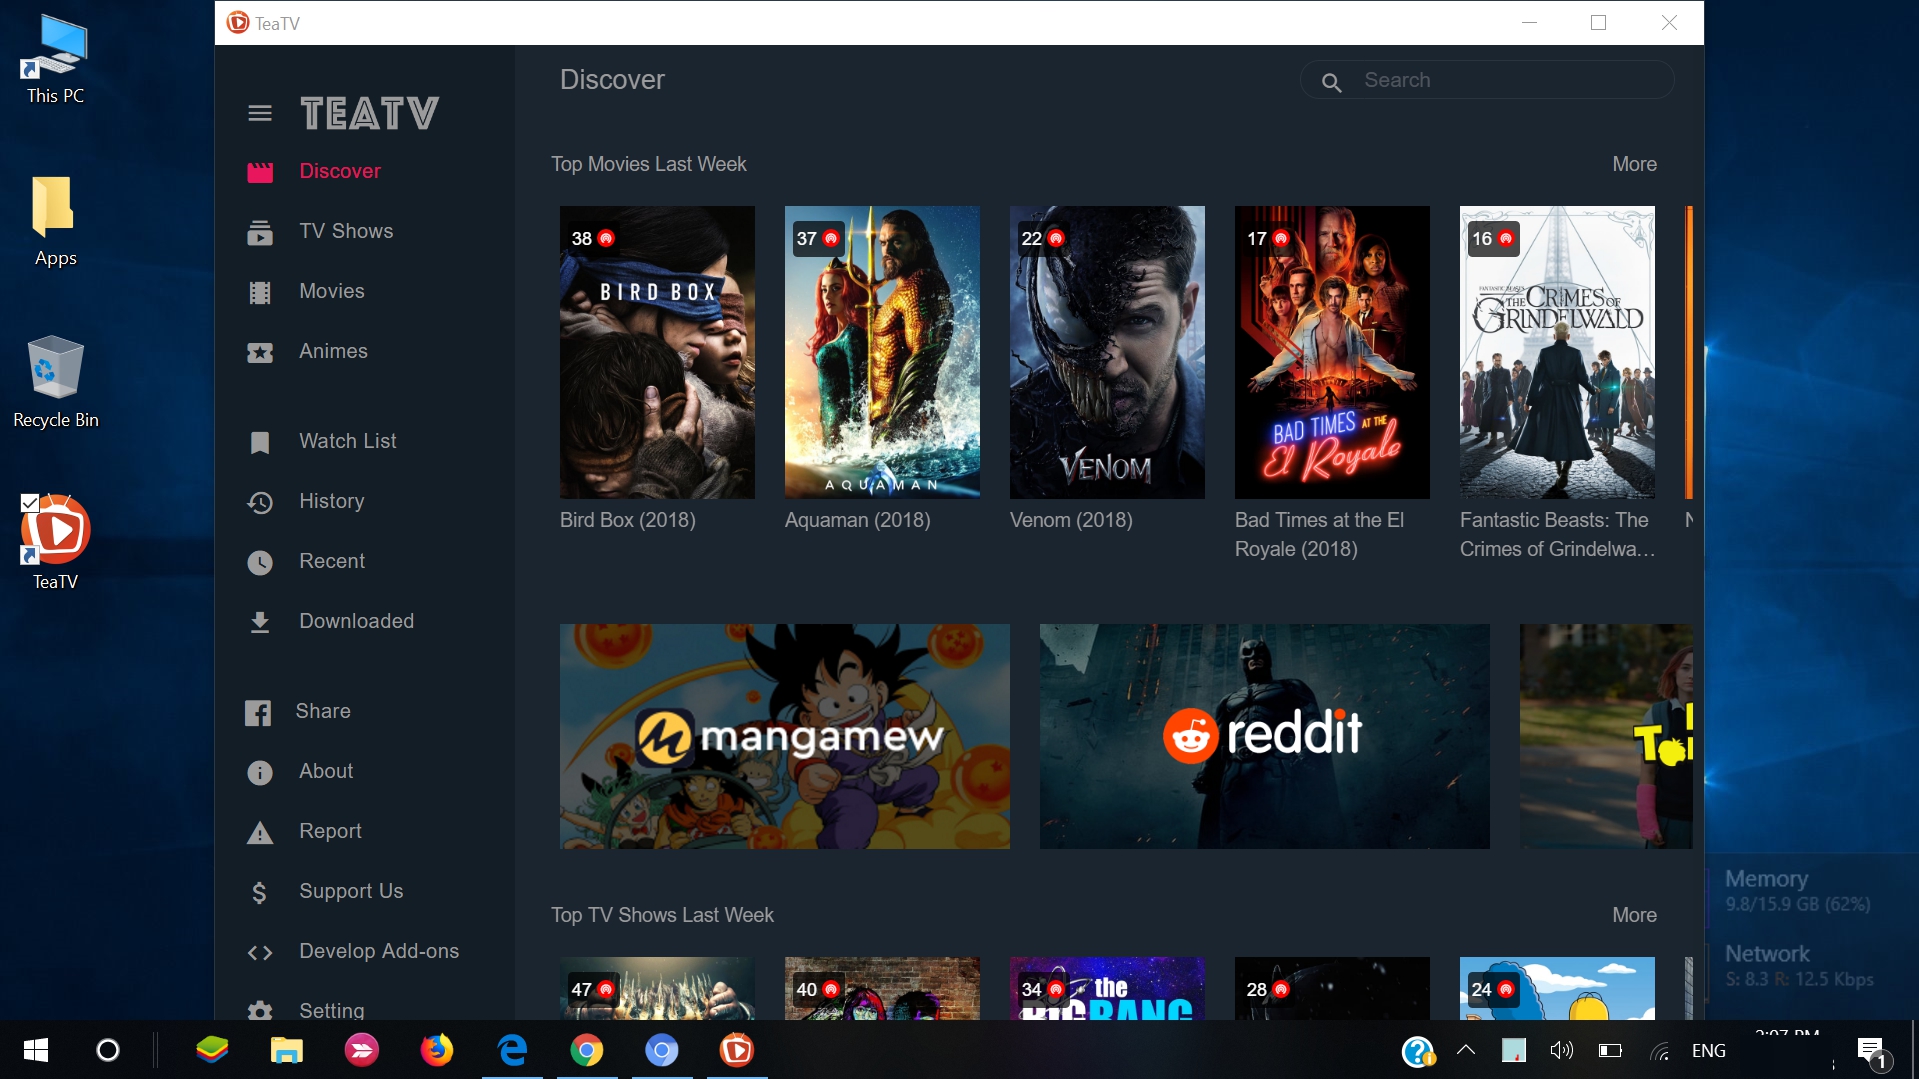 TeaTv for PC Windows 10 Installation Guide in 5 minutes - TeaTVBox